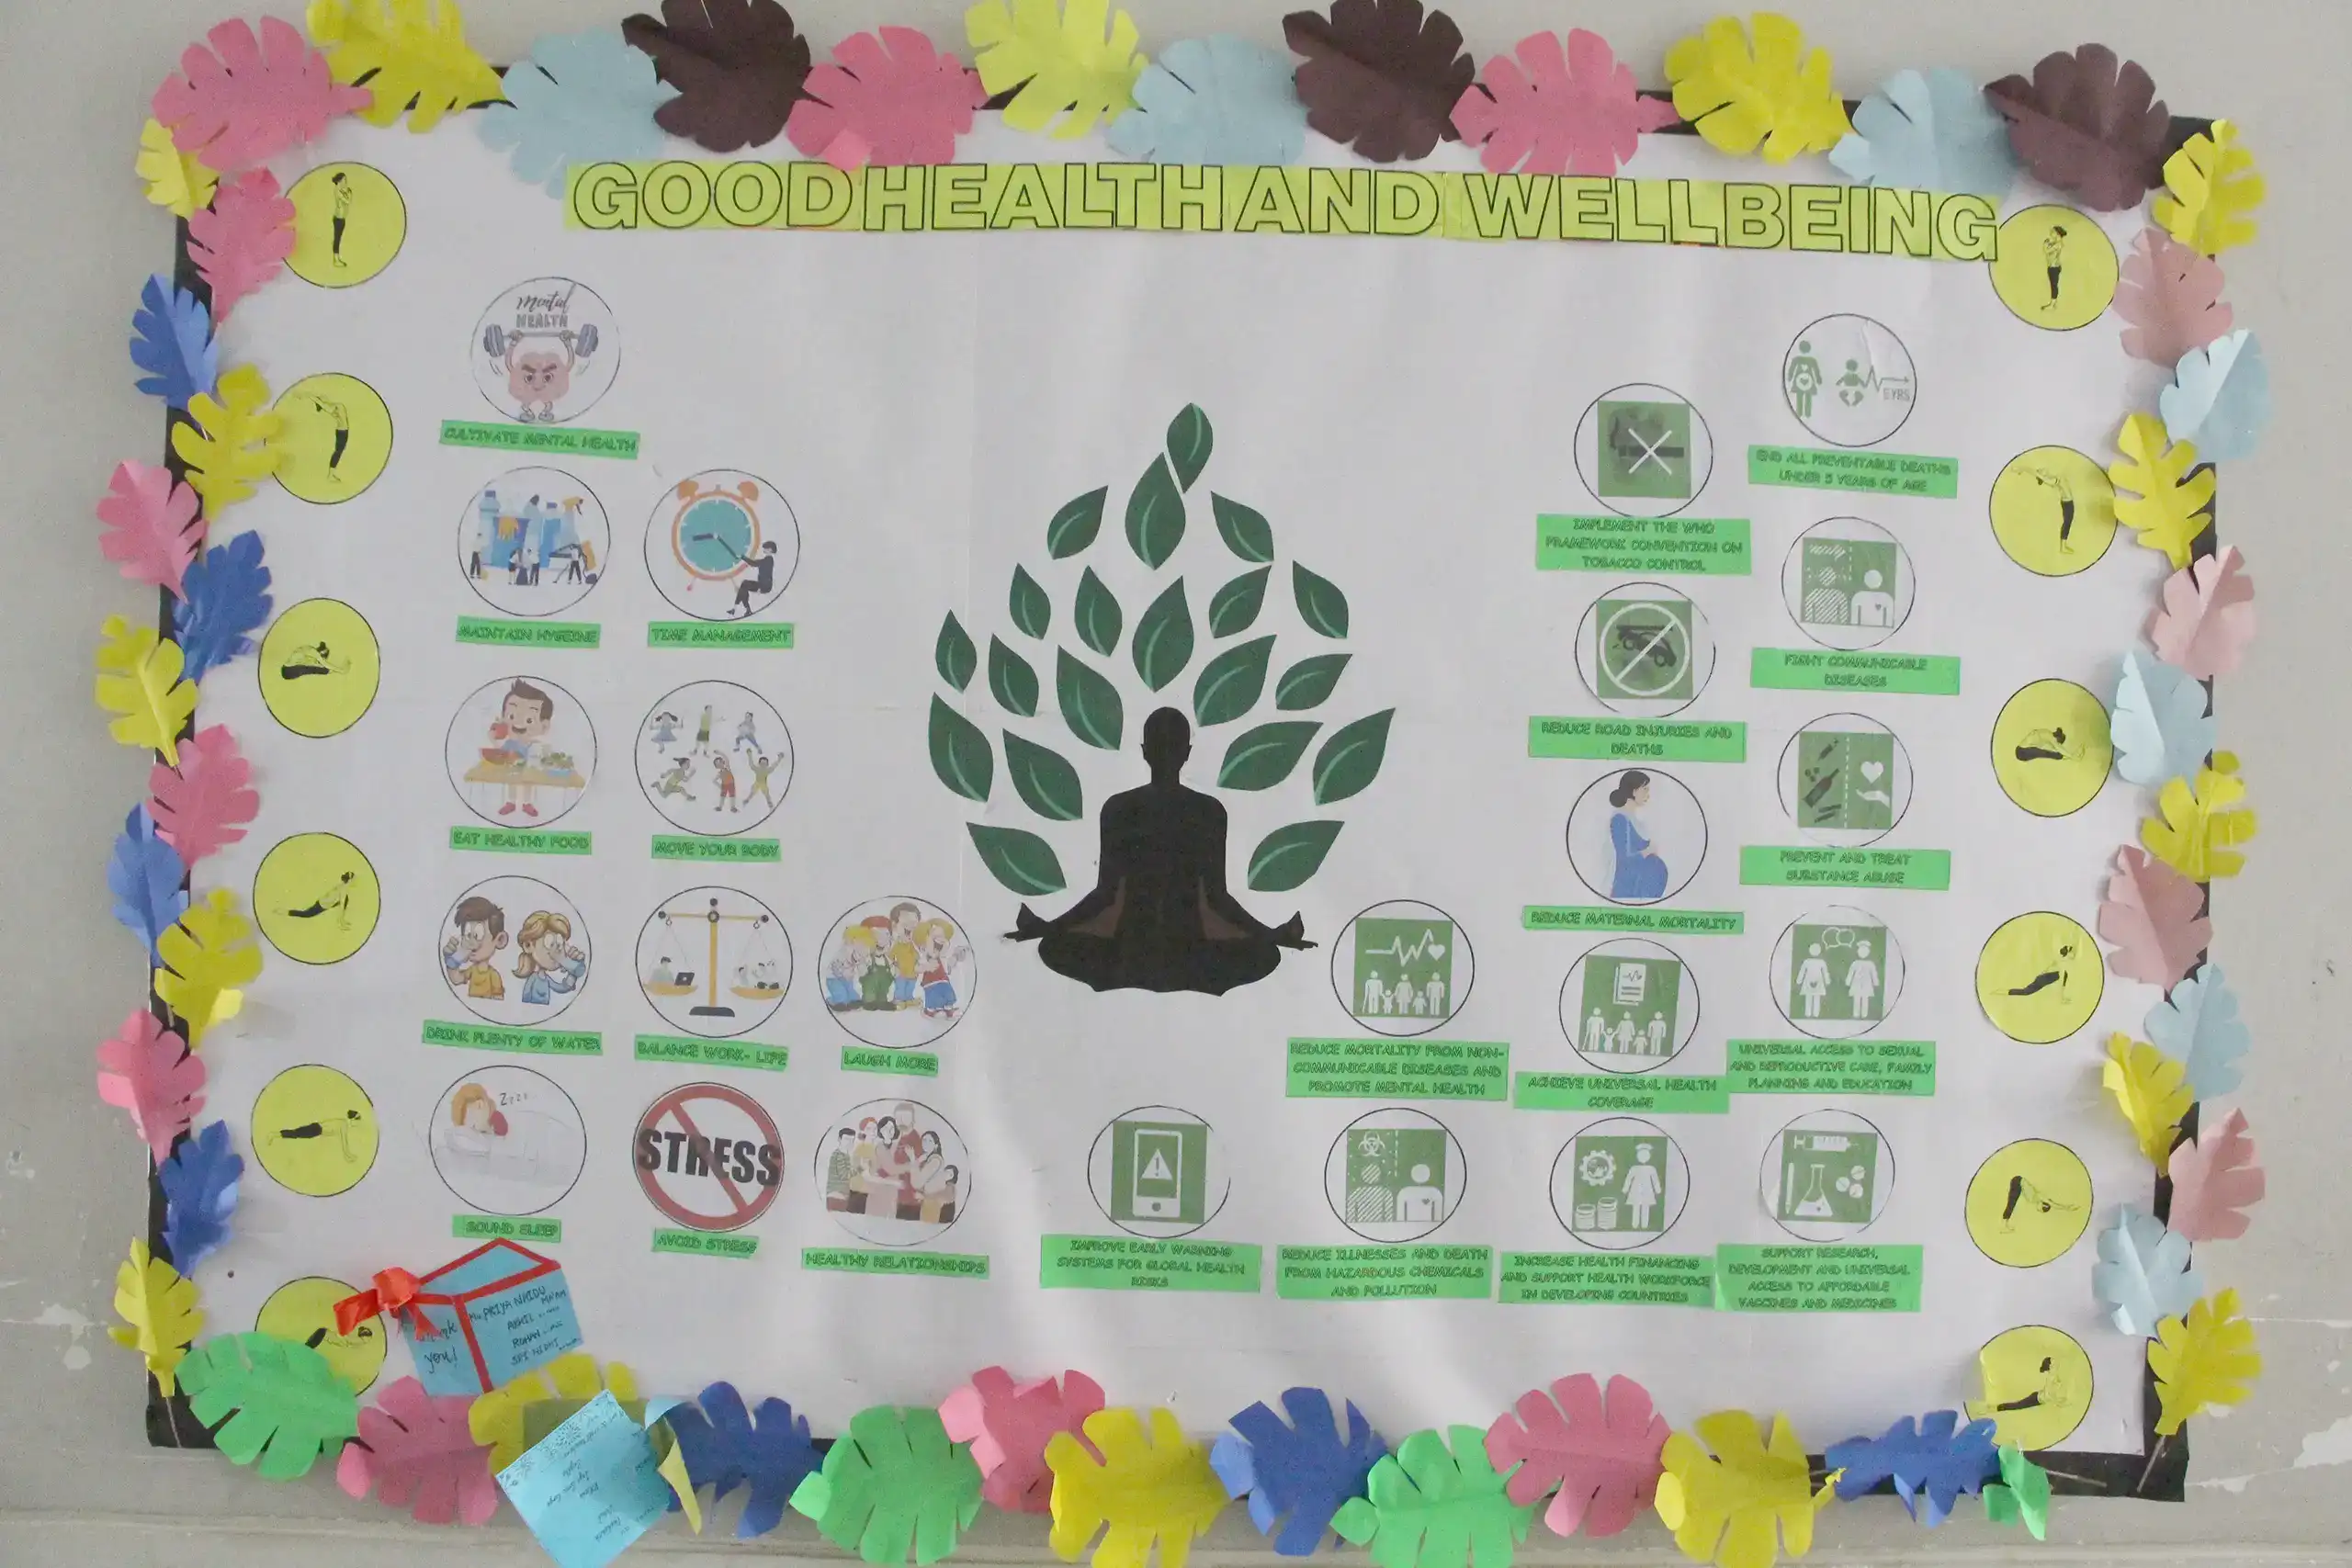 Bulletin board at DPS Warangal decorated on the topic good health and well being.